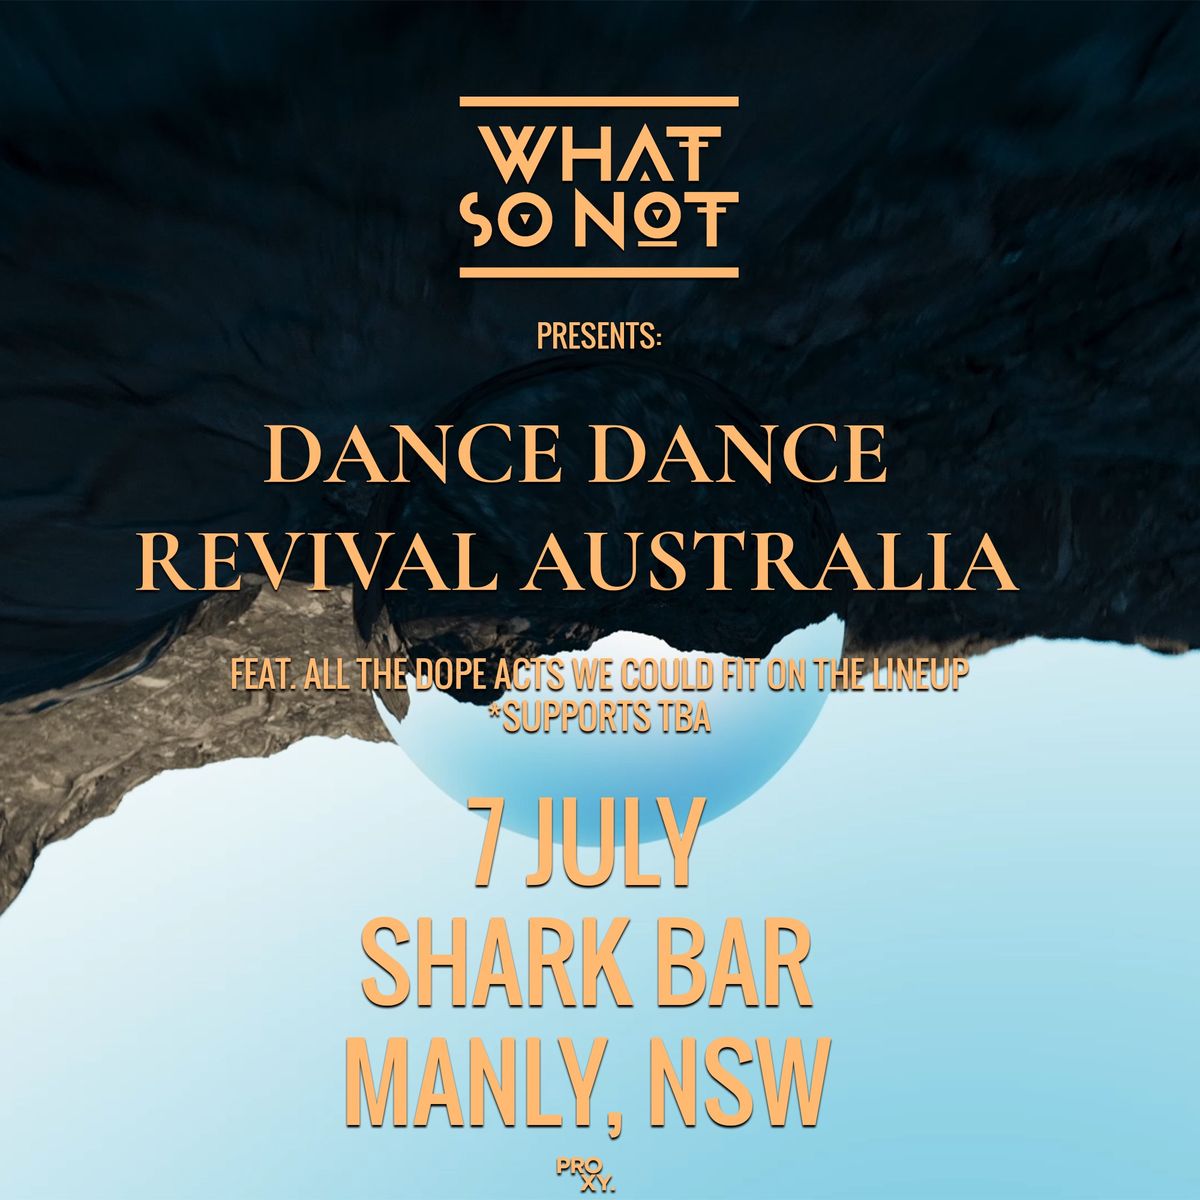 WHAT SO NOT 'DANCE DANCE REVIVAL AUSTRALIA' w\/ Special Guests at Shark Bar